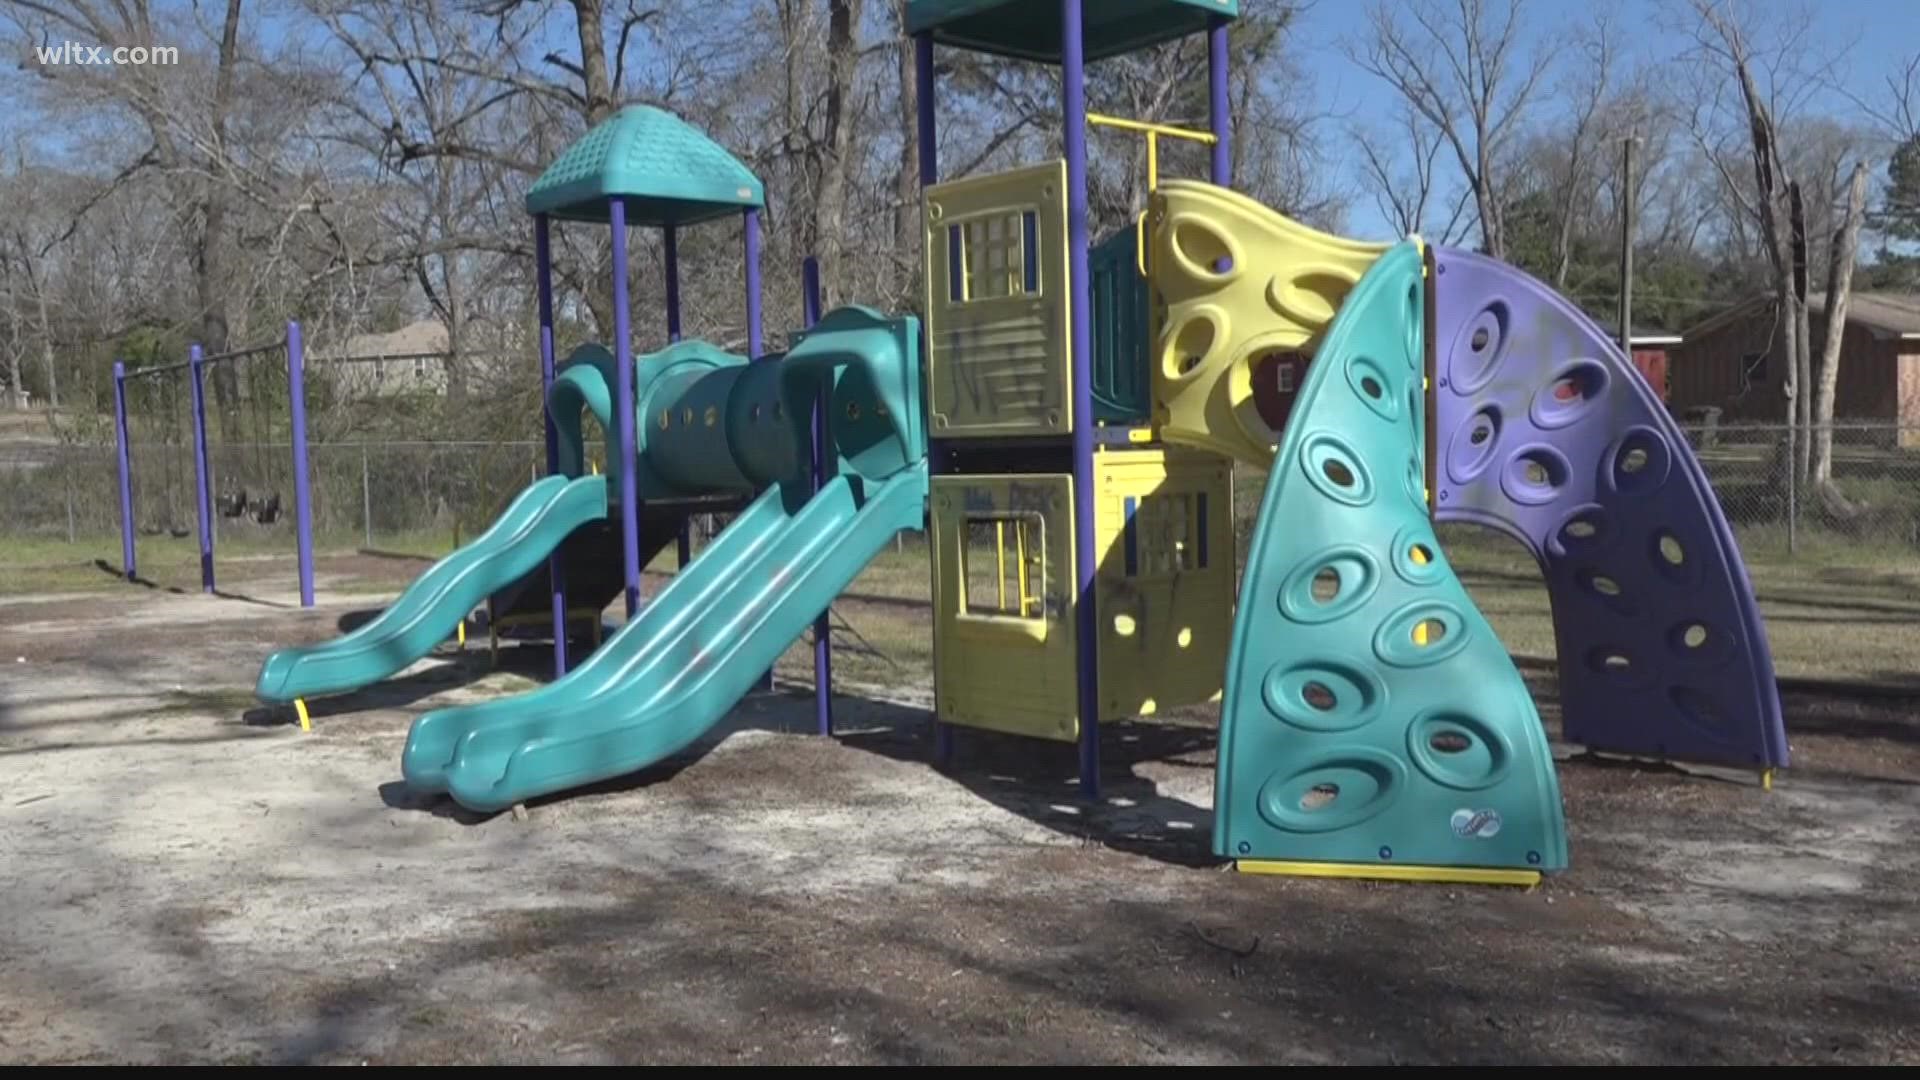 City officials say there are about 12-16 playgrounds in the City of Orangeburg, and every single one of them have now been upgraded with the use of capital funds.